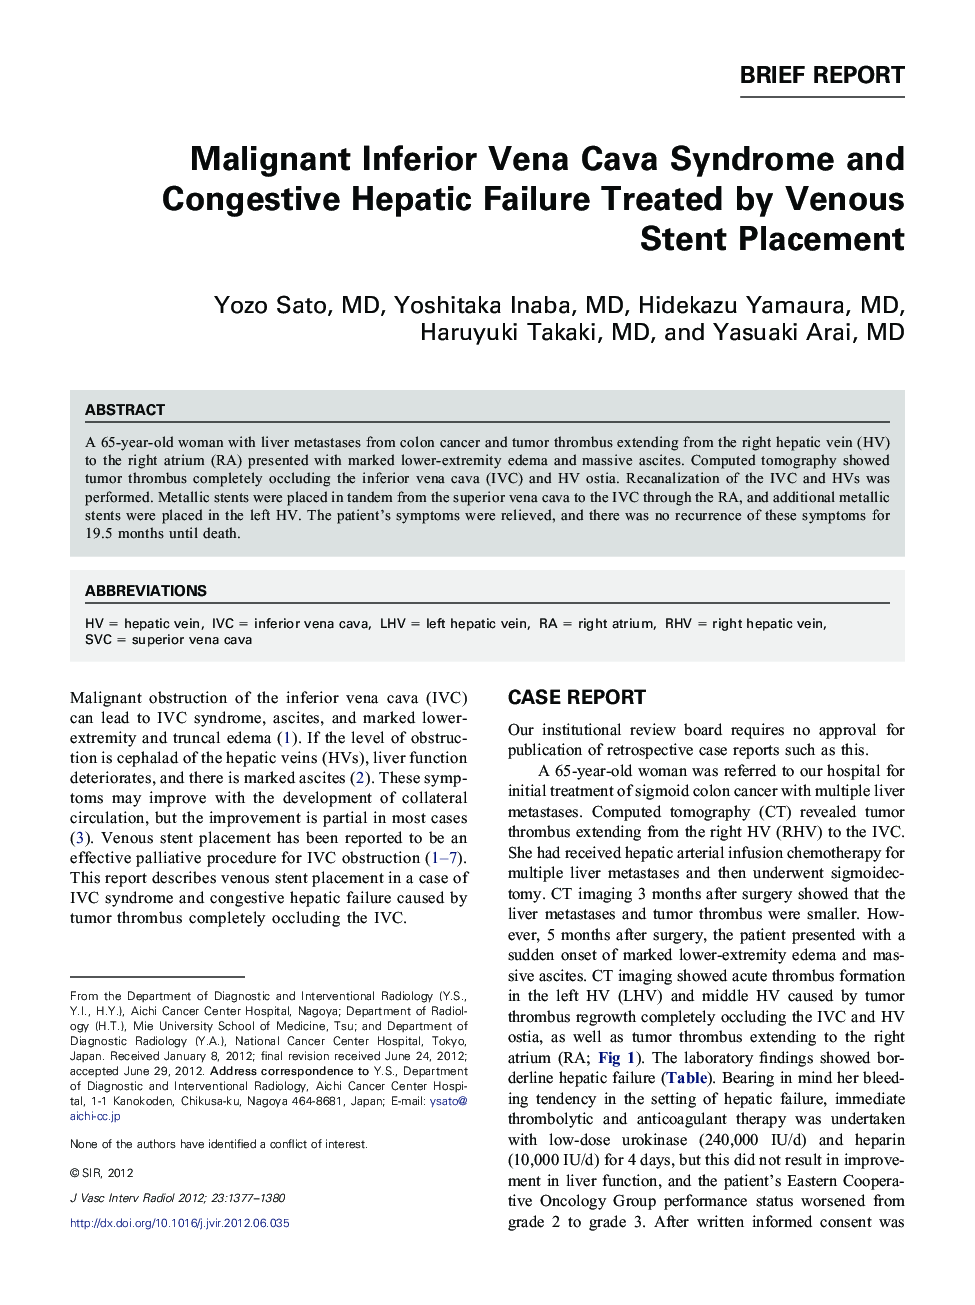 Malignant Inferior Vena Cava Syndrome and Congestive Hepatic Failure Treated by Venous Stent Placement